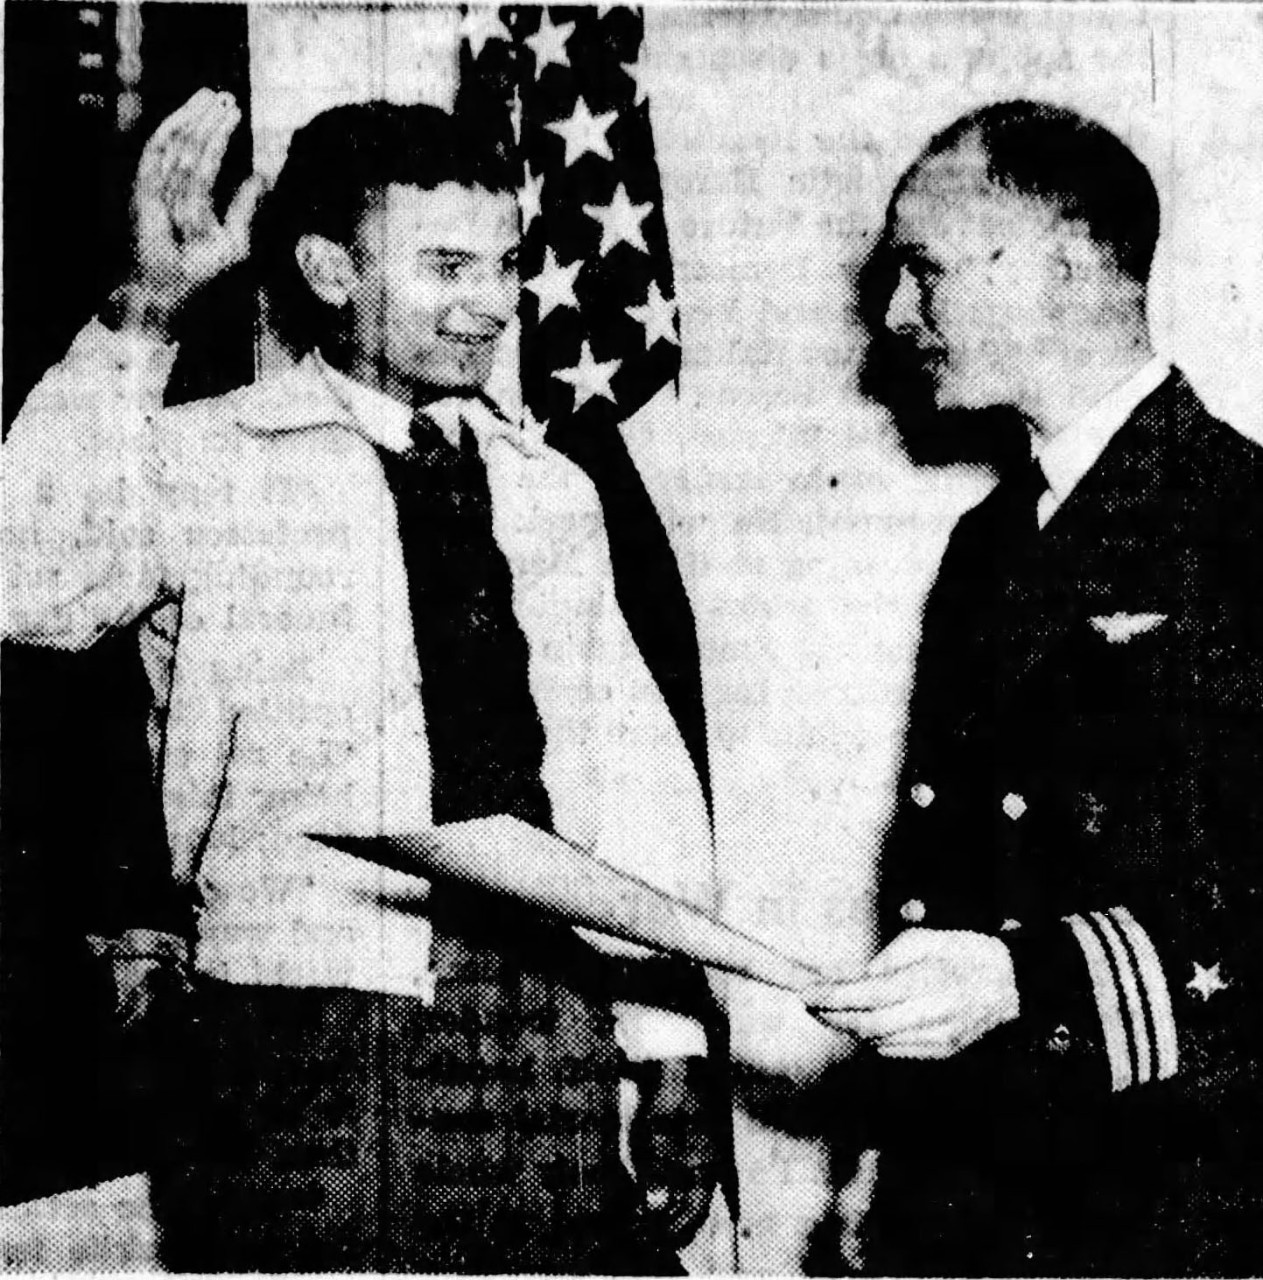 Man in civilian clothing raises his right hand while looking at a man in uniform.